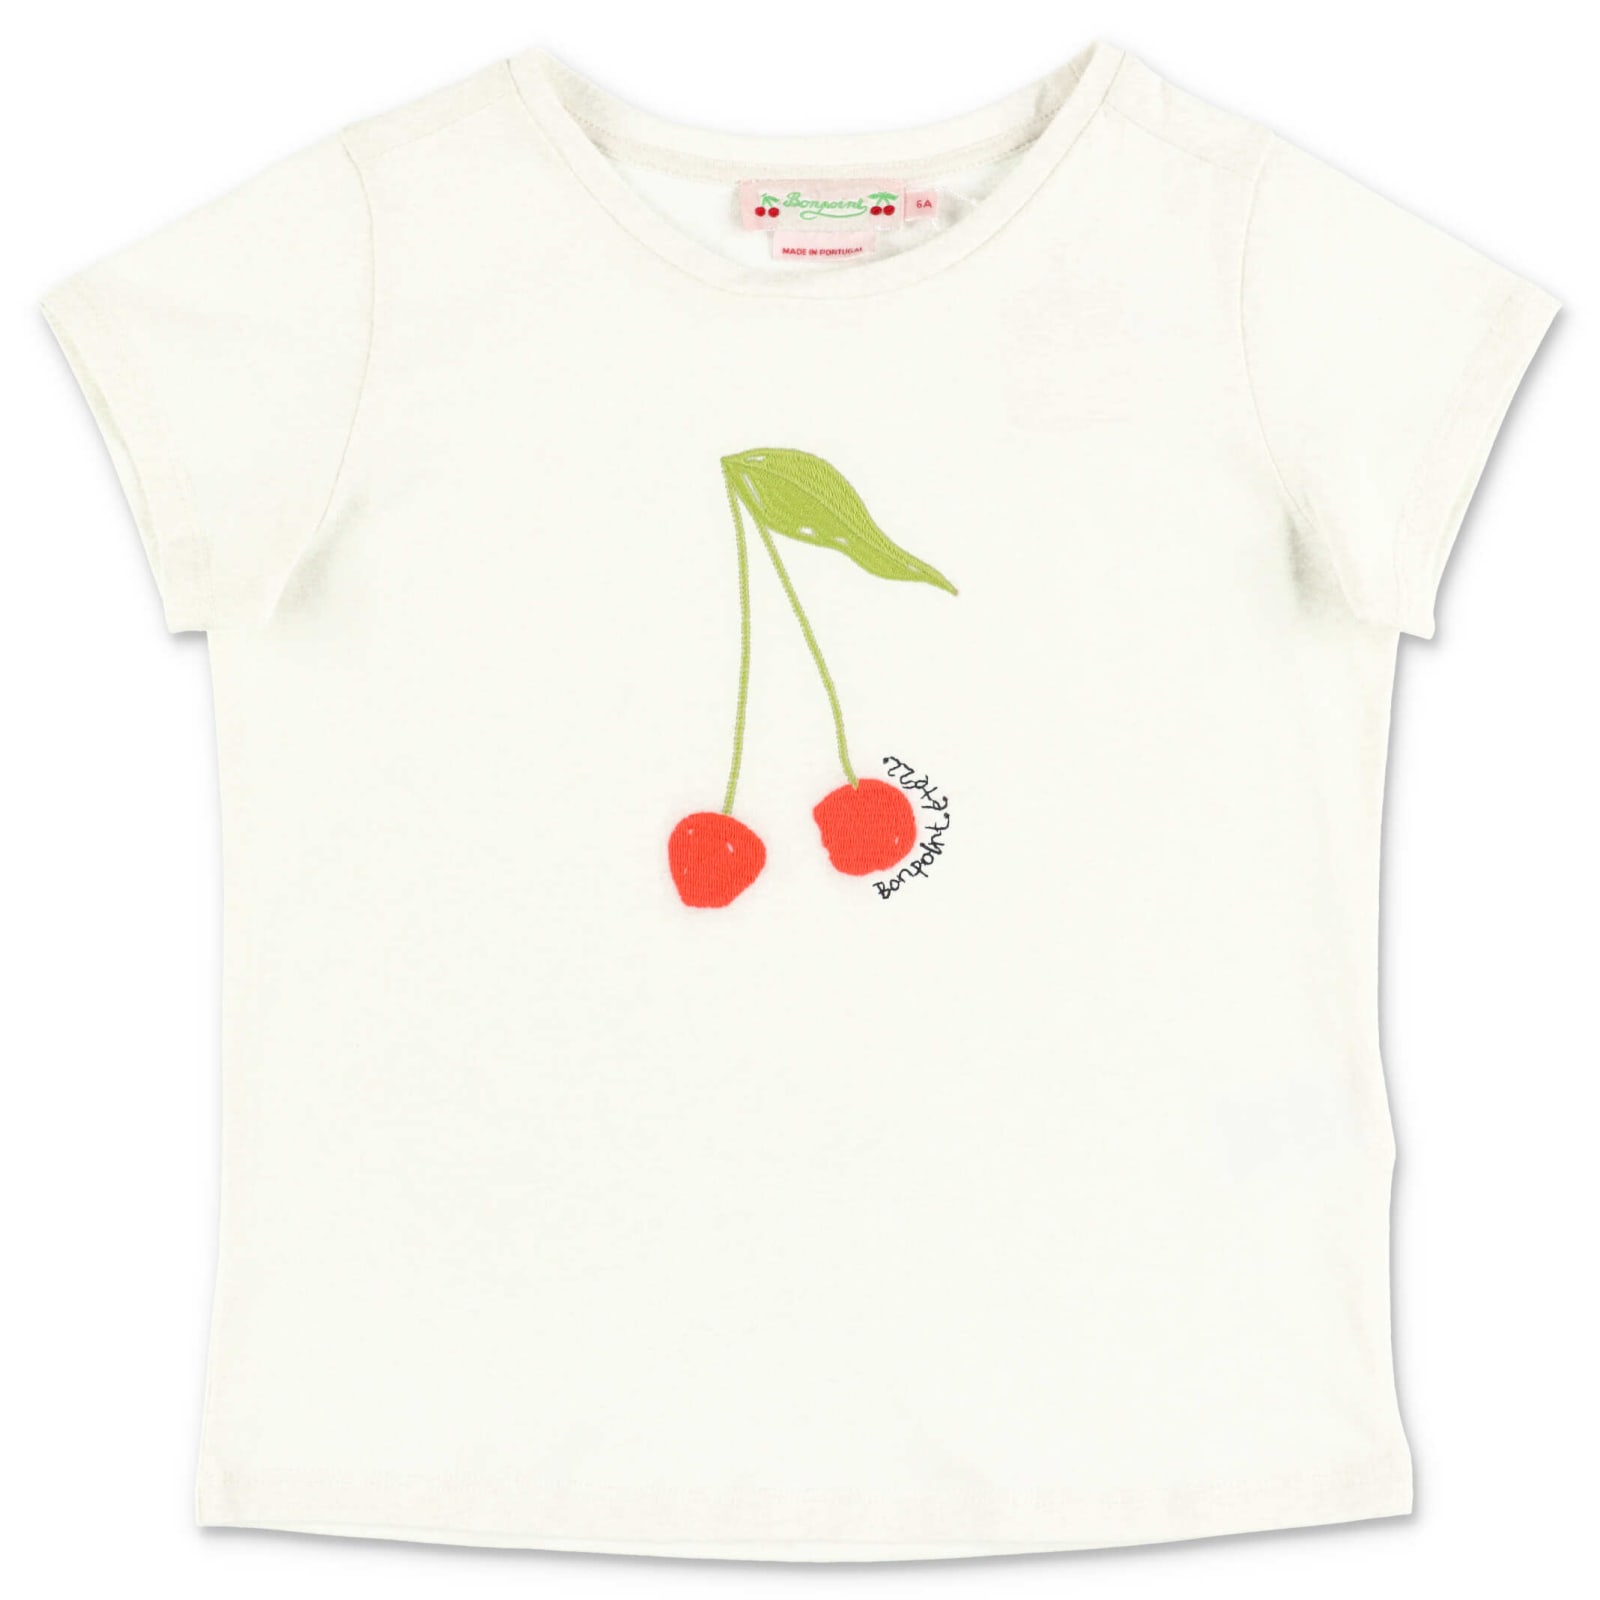 Bonpoint T-shirt Bianca In Jersey Di Cotone